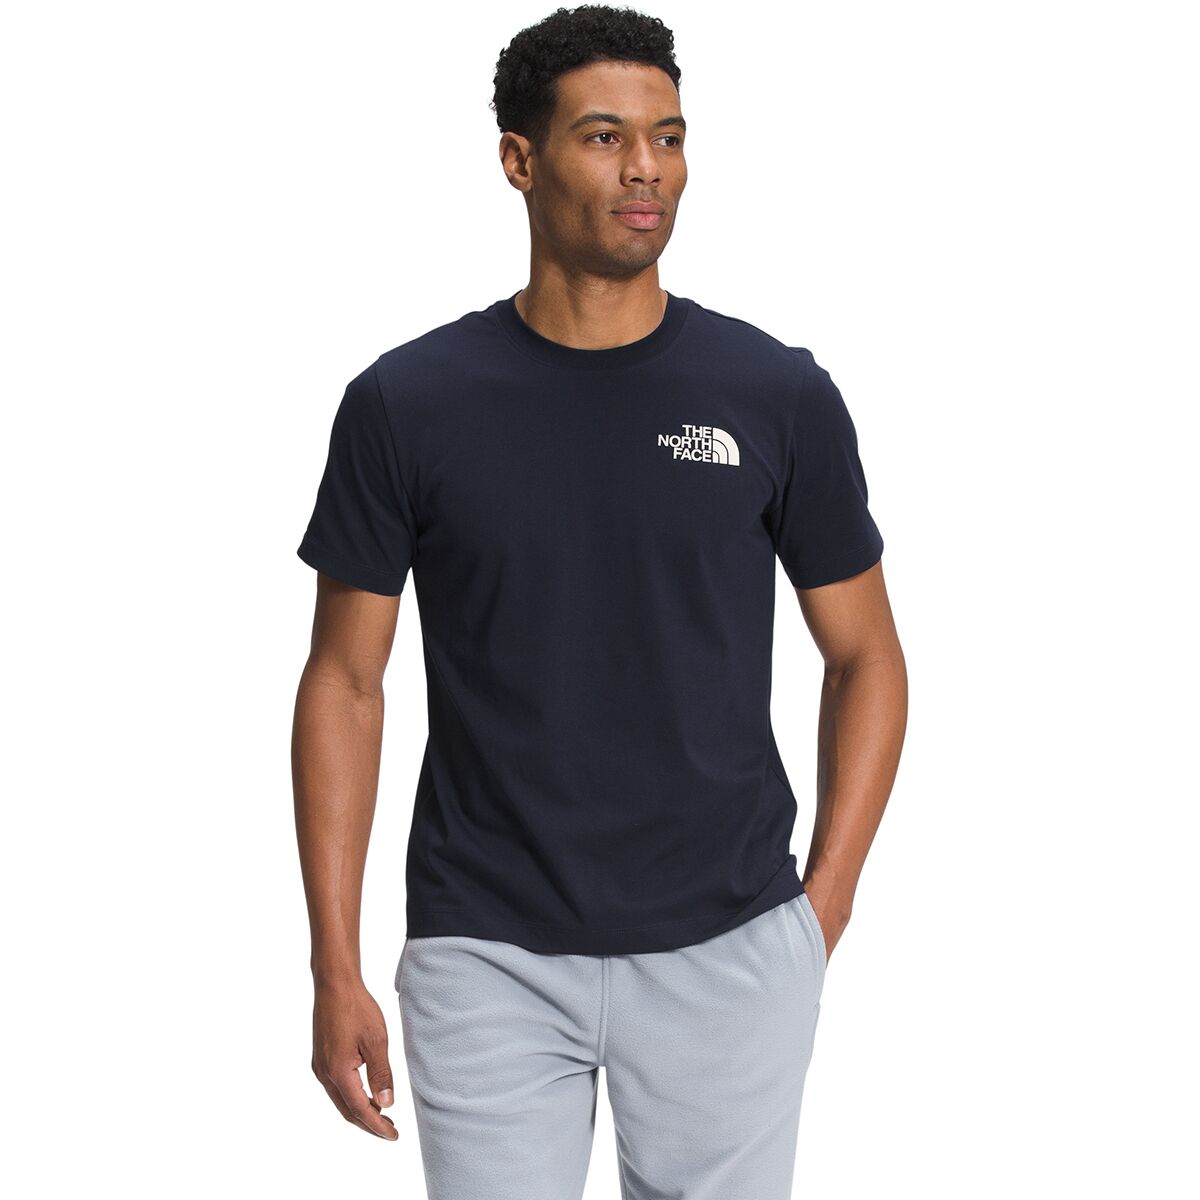 The North Face Climb Graphic T-Shirt - Men's - Clothing